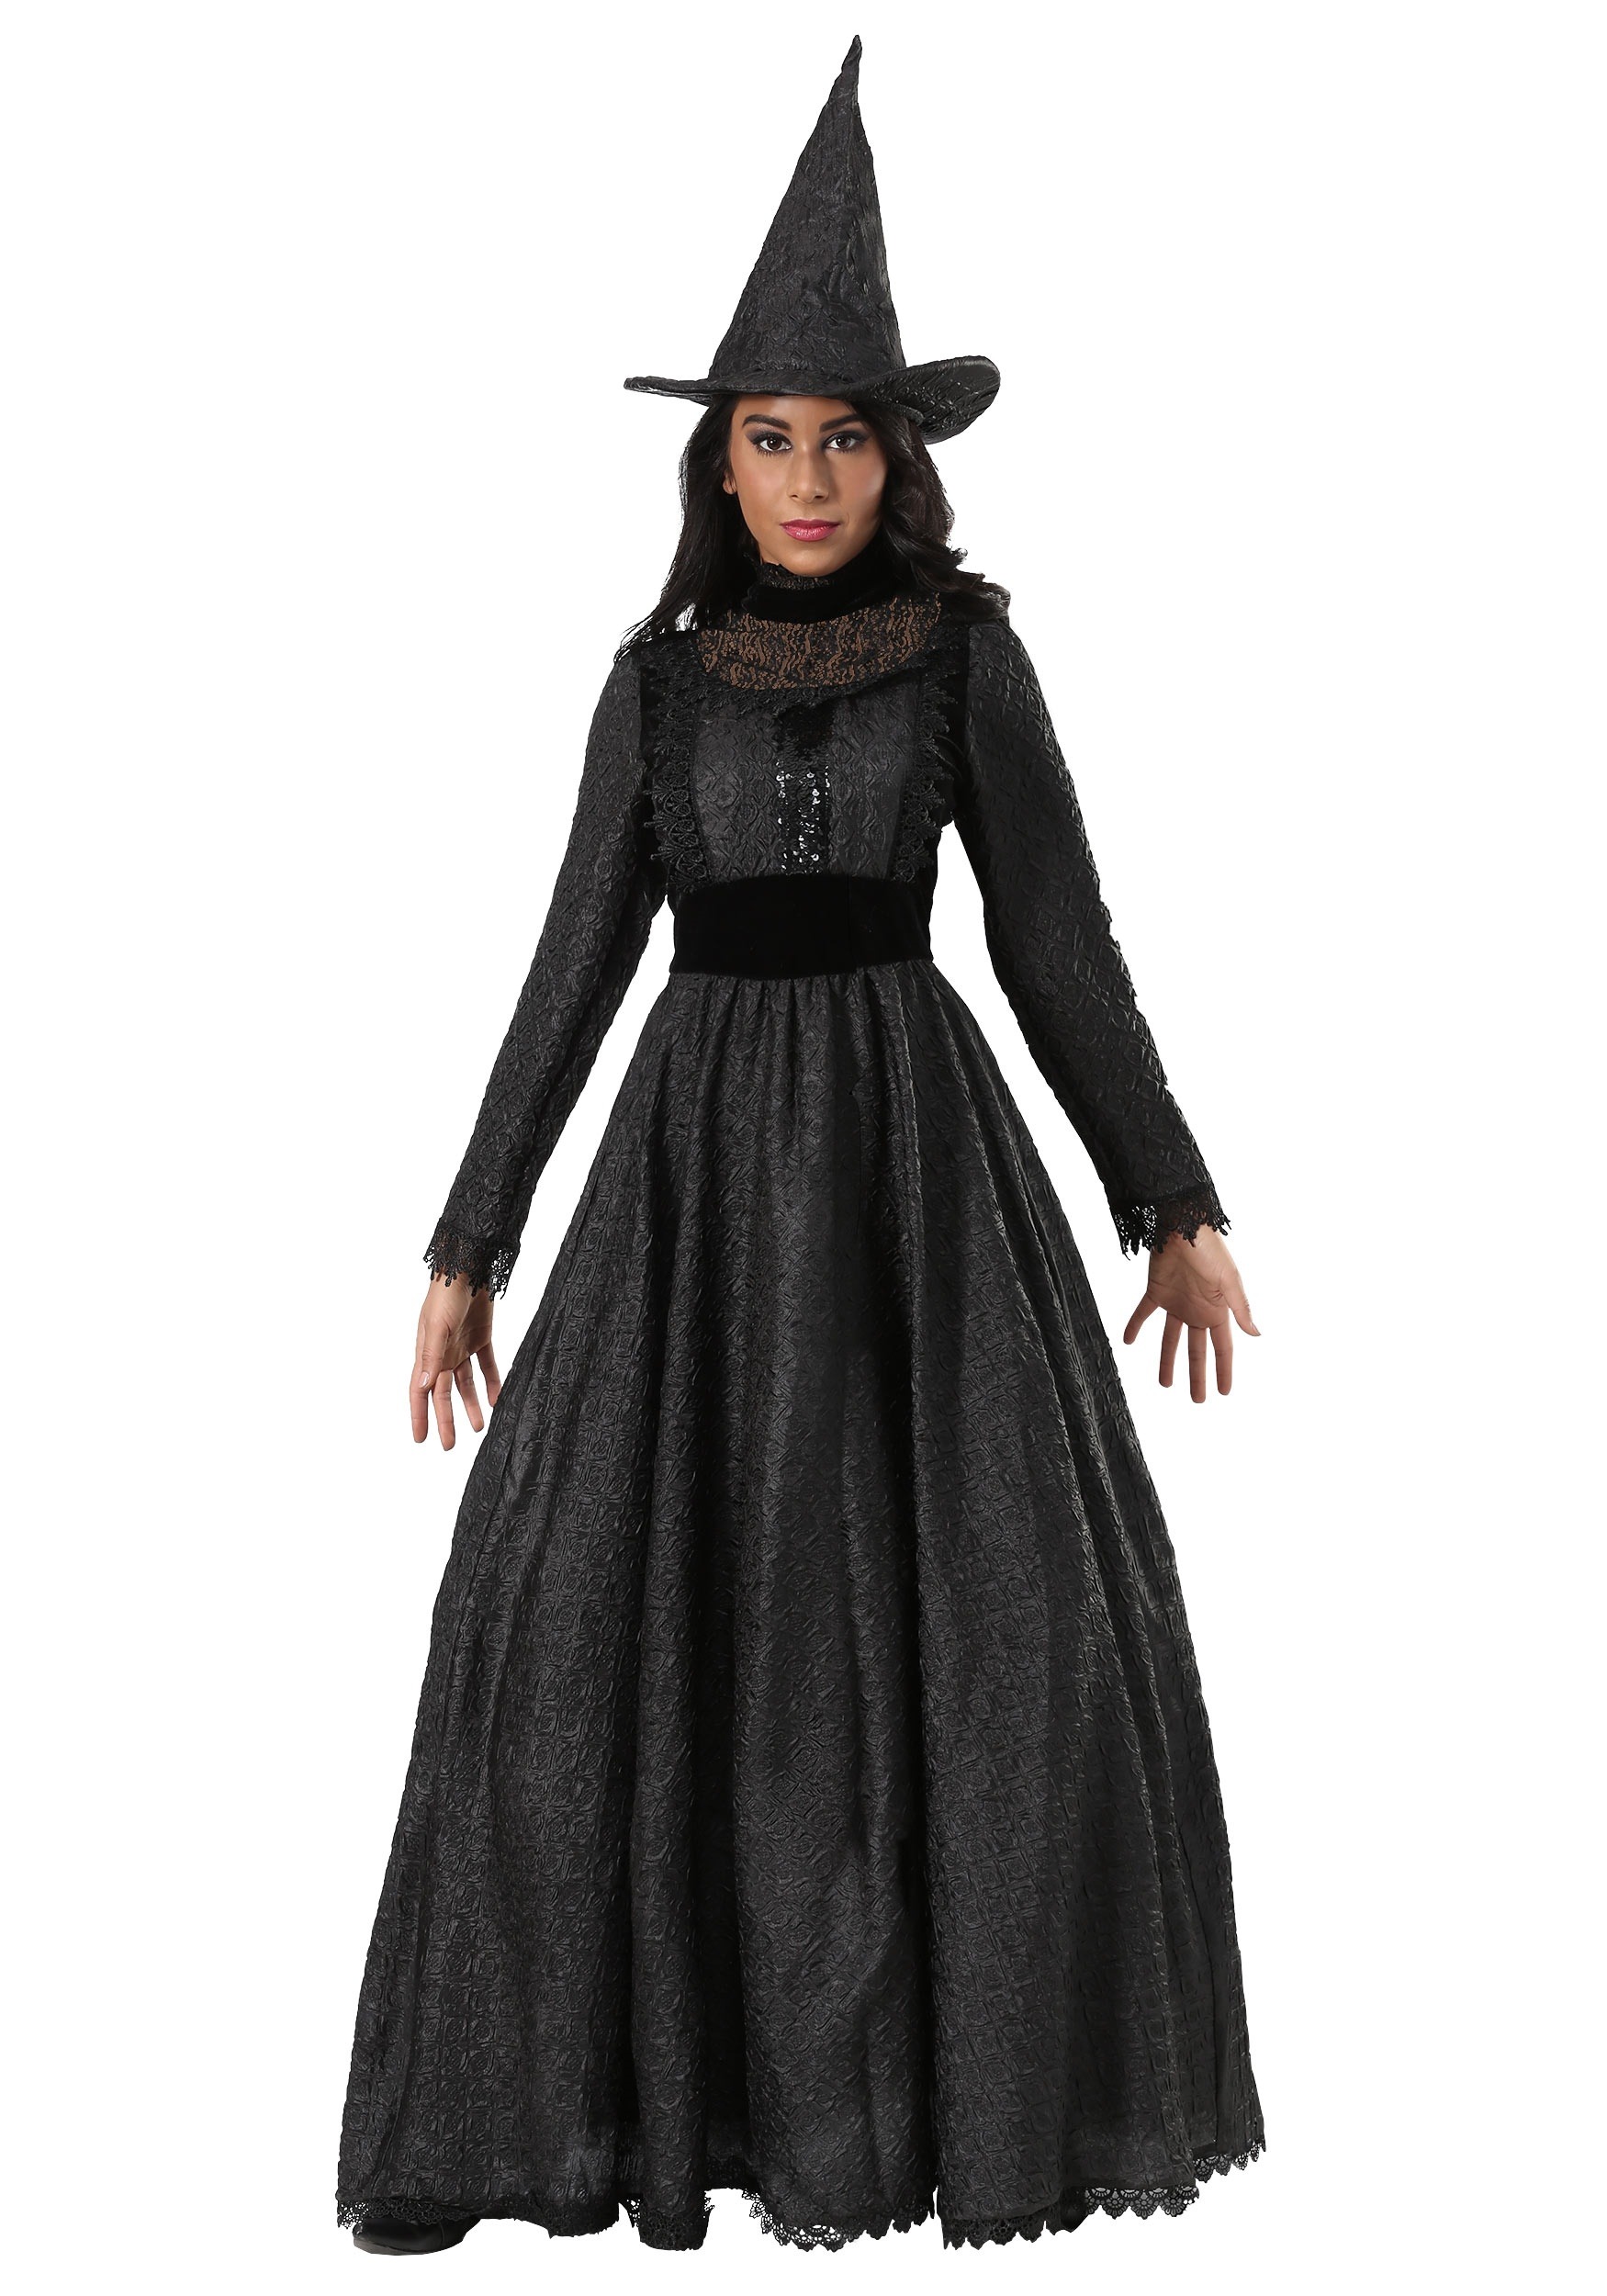 Plus Size Deluxe Wicked Witch Costume